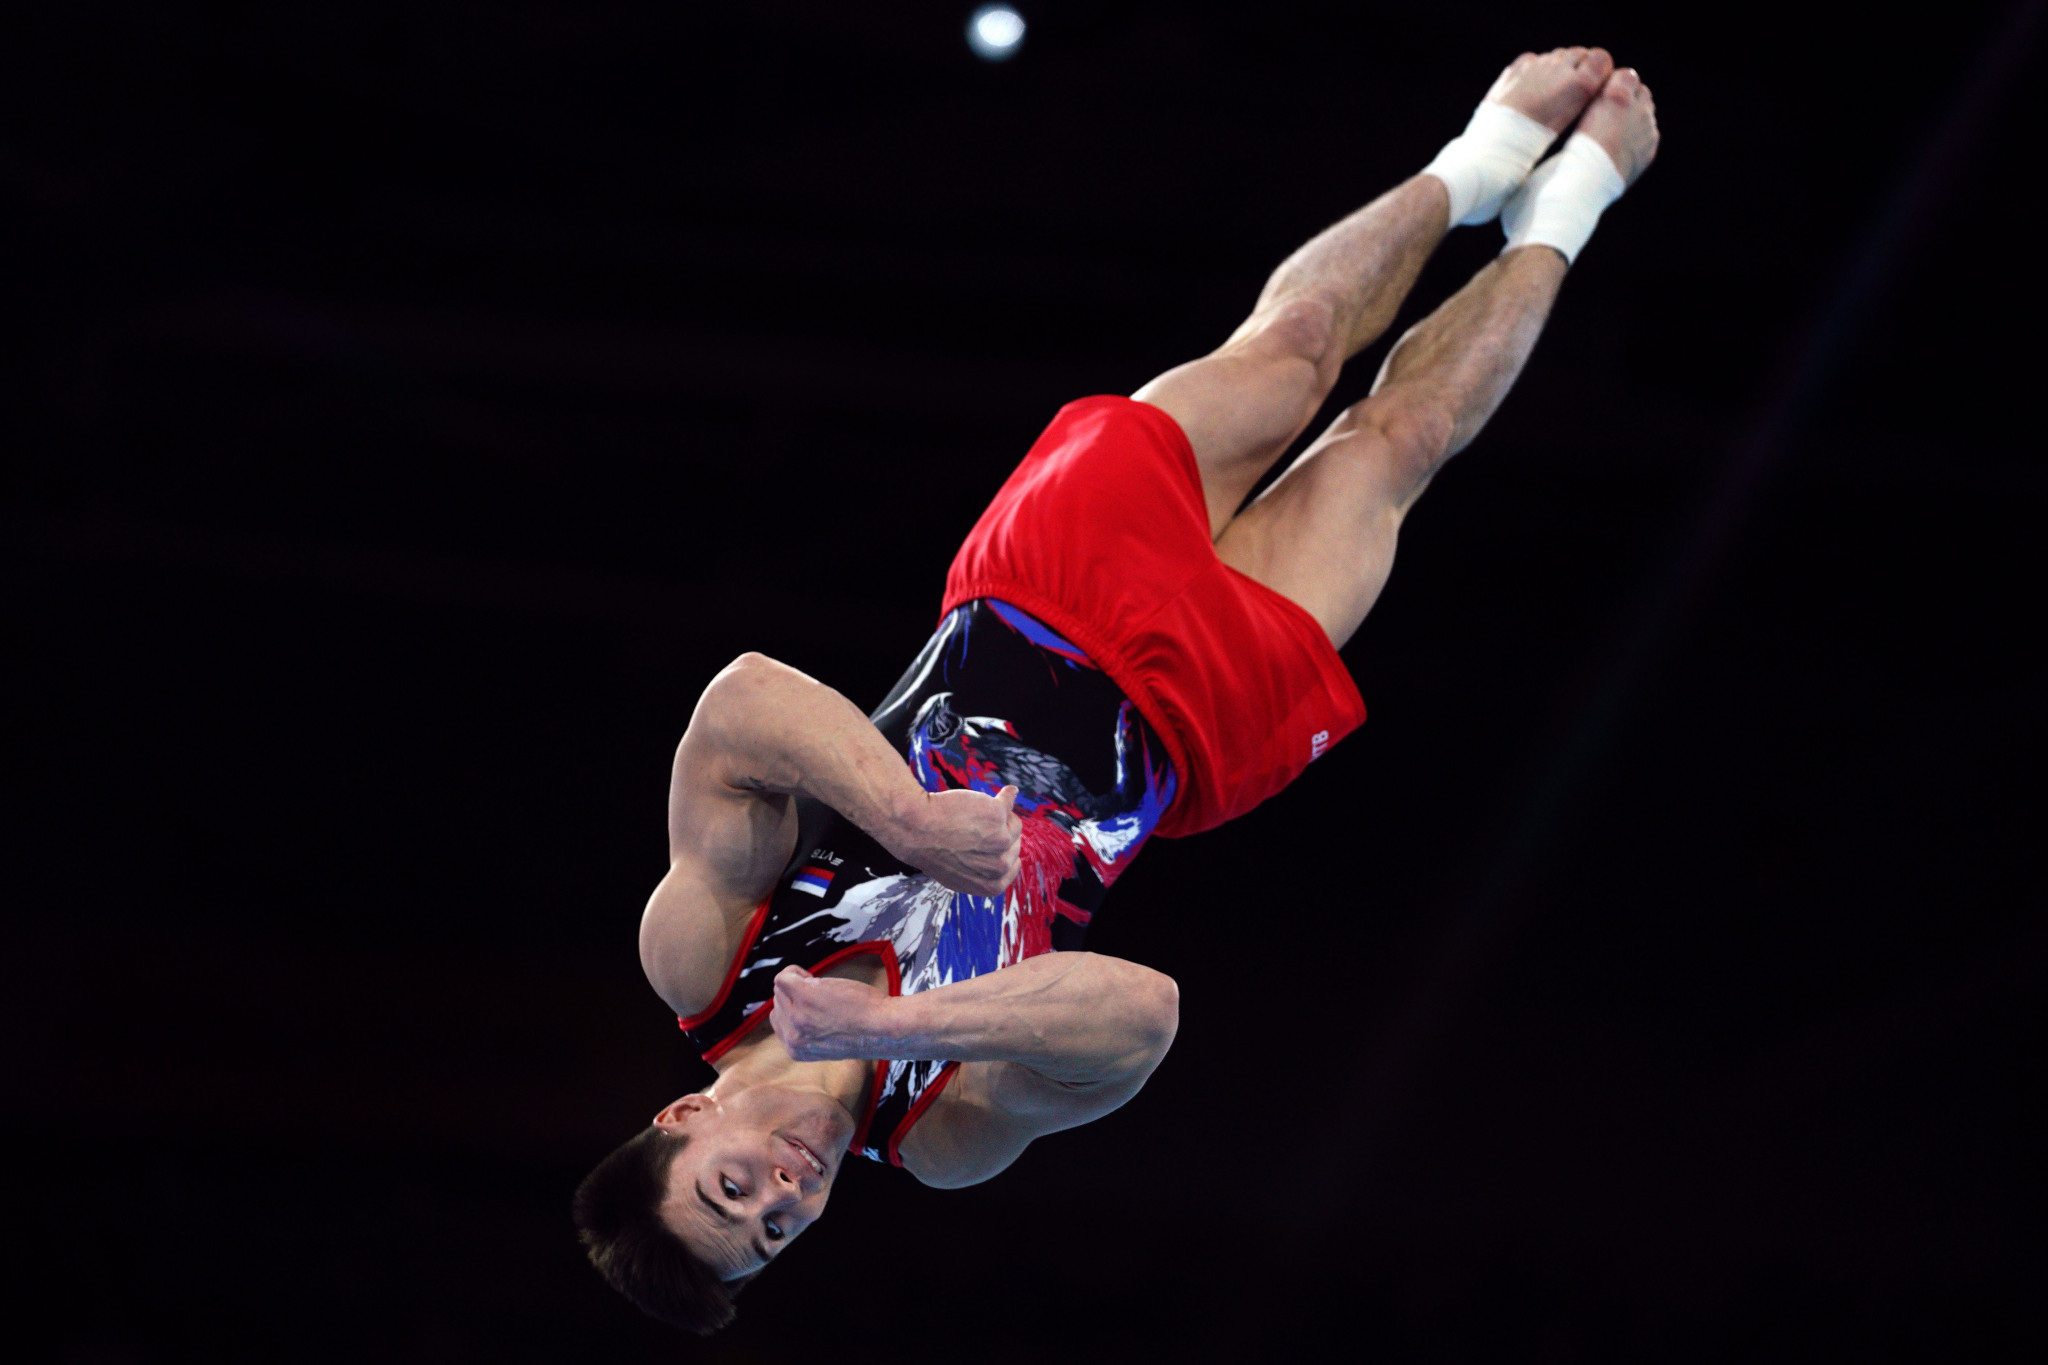 European champion Nikita Nagornyy leads the all-around standings at the Artistic Gymnastics World Championships in Stuttgart ©Getty Images